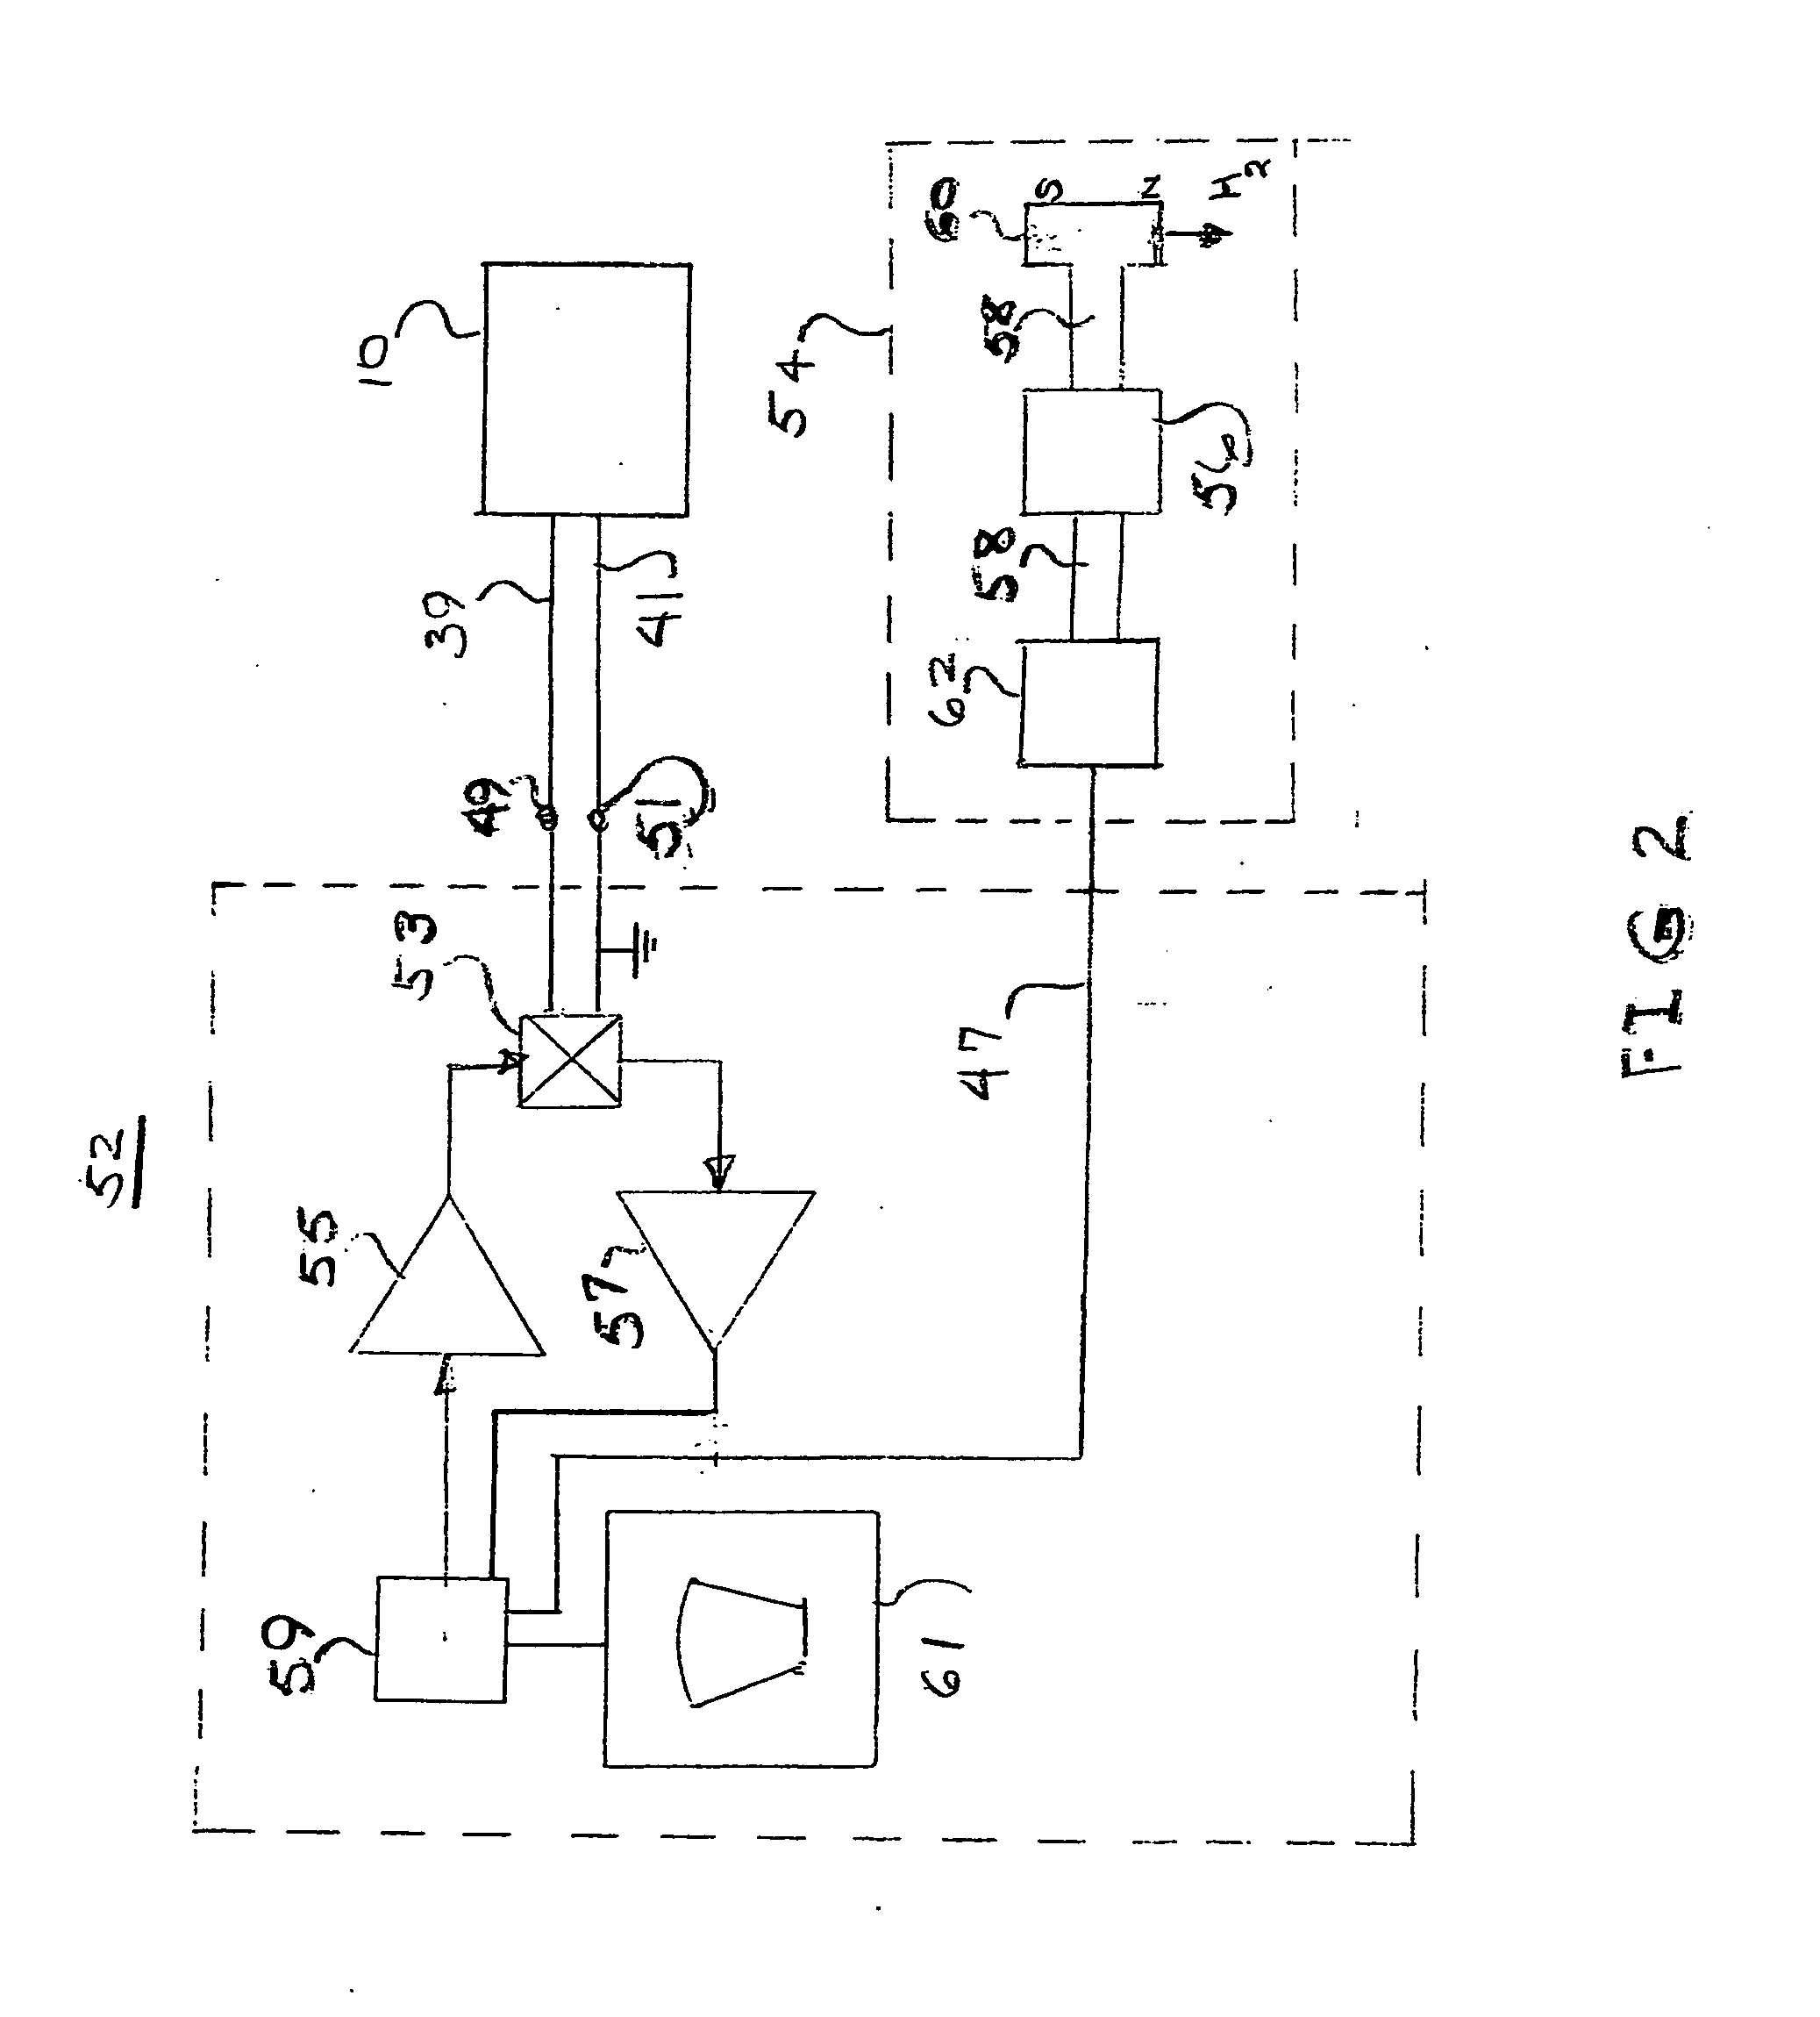 Apparatus and method for intravascular imaging